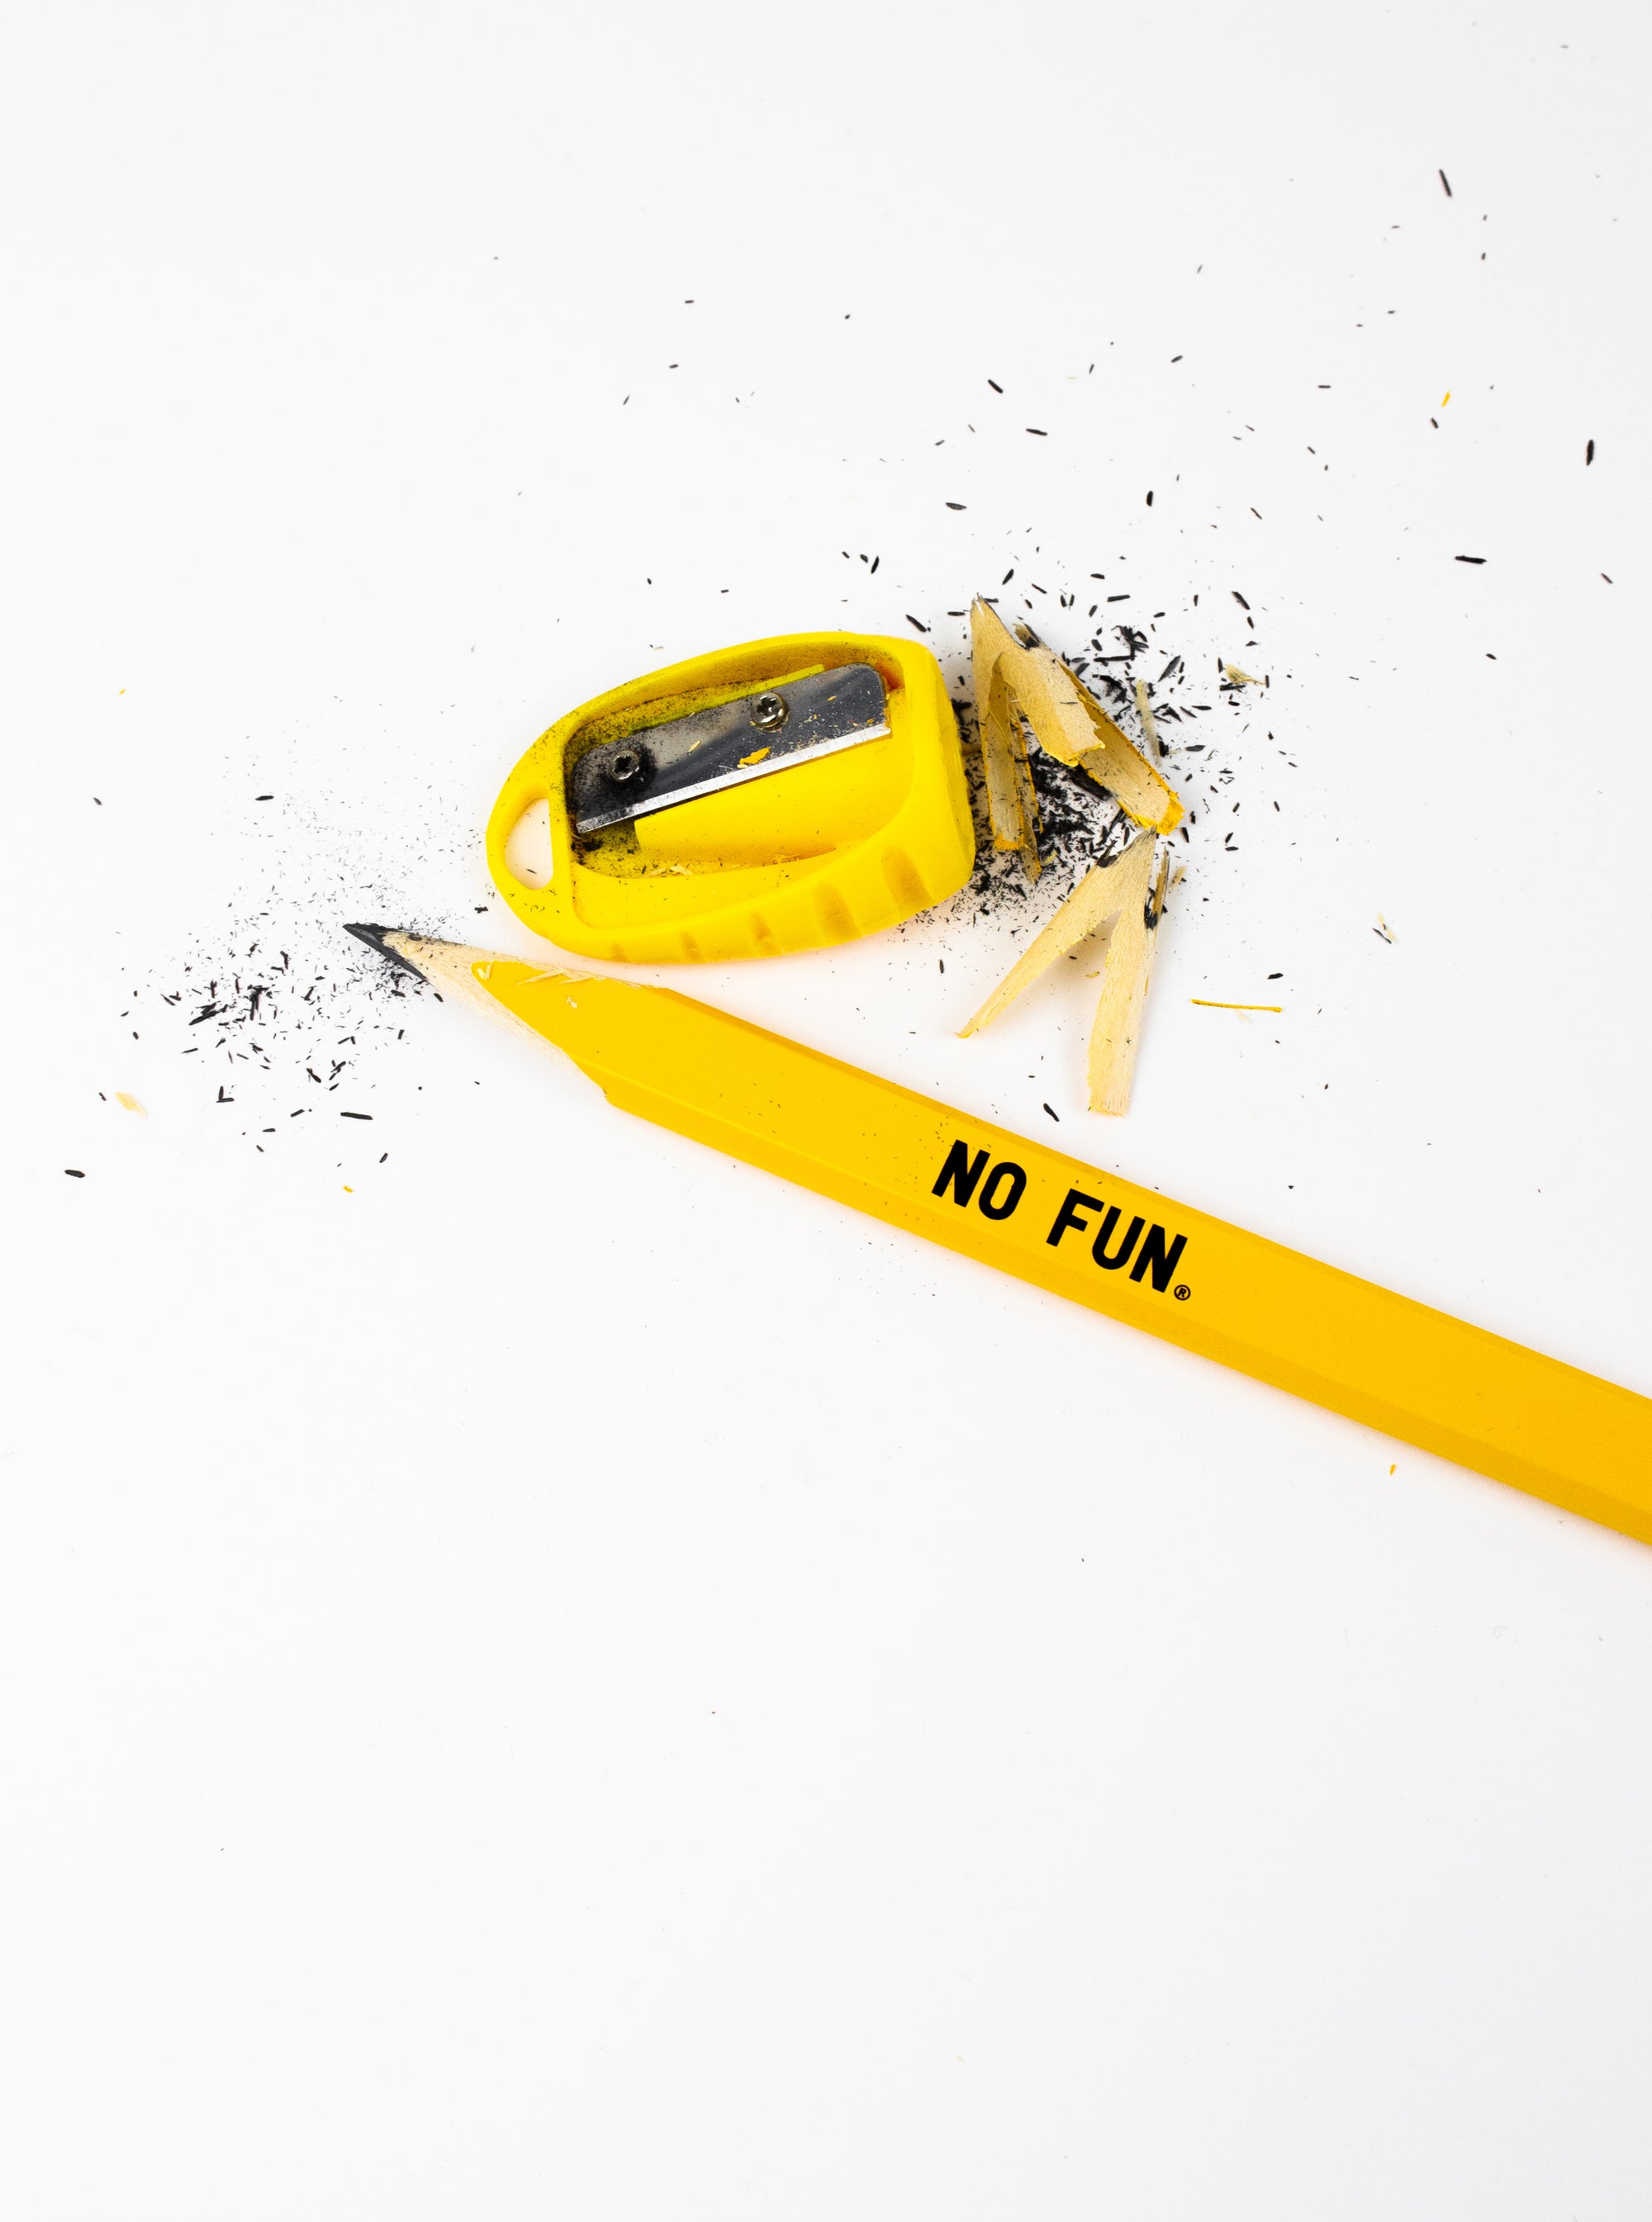 A yellow carpenter pencil and sharpener.  Graphite shards and pencil shavings are found near the sharpener.  There is a small No Fun® logo in black, on the center of the pencil.